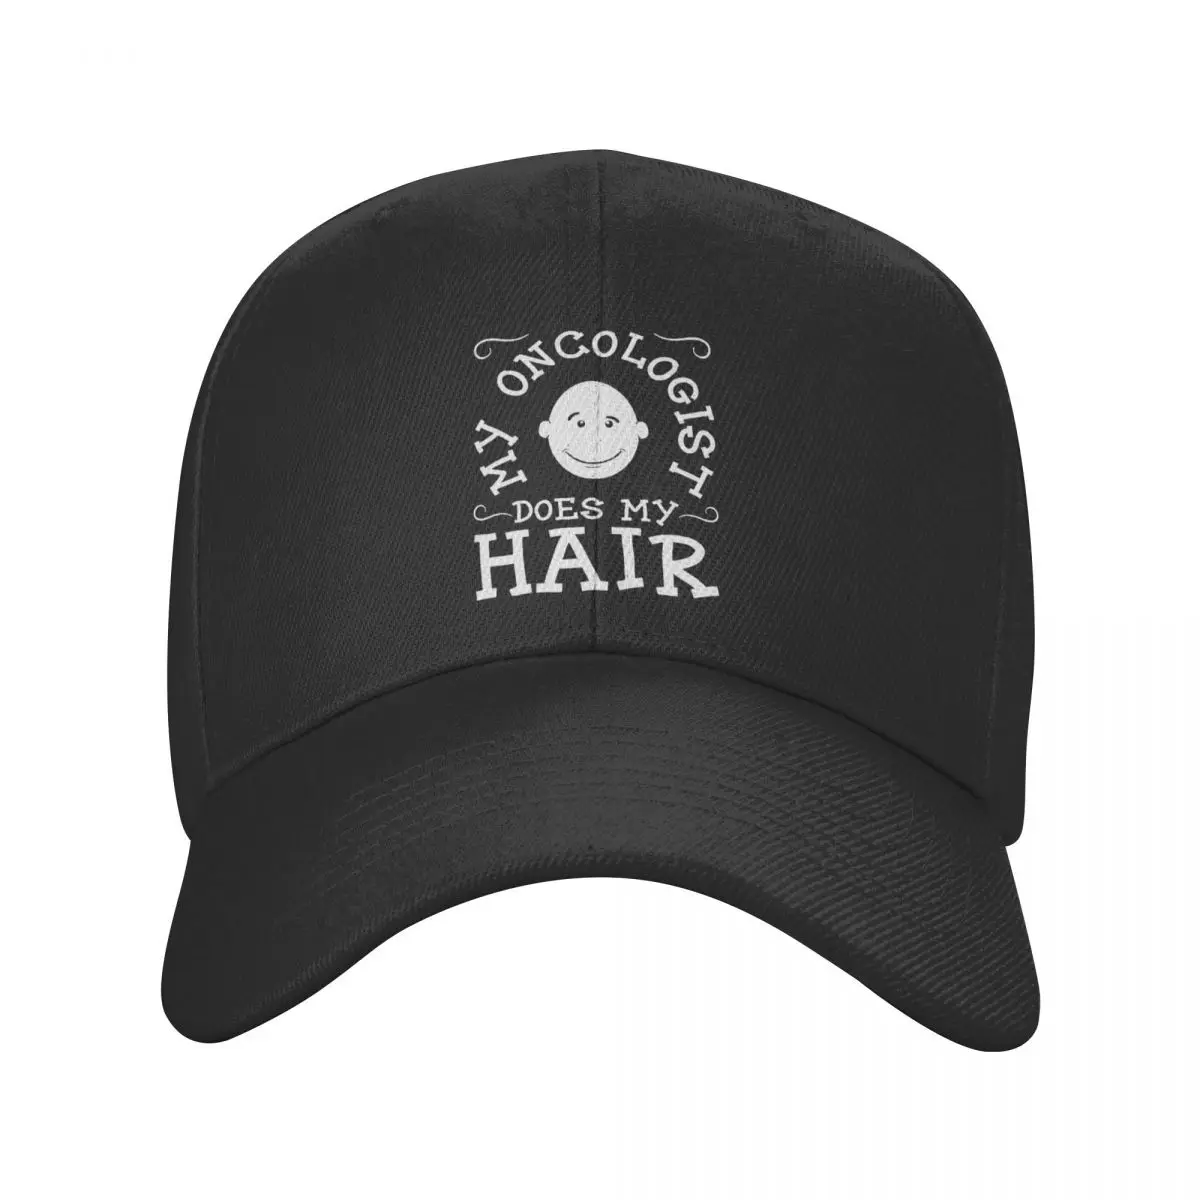 

My Oncologist Does My Hair Funny Cancer Survivor Casquette, Polyester Cap Fashionable Moisture Wicking Gift Nice Gift